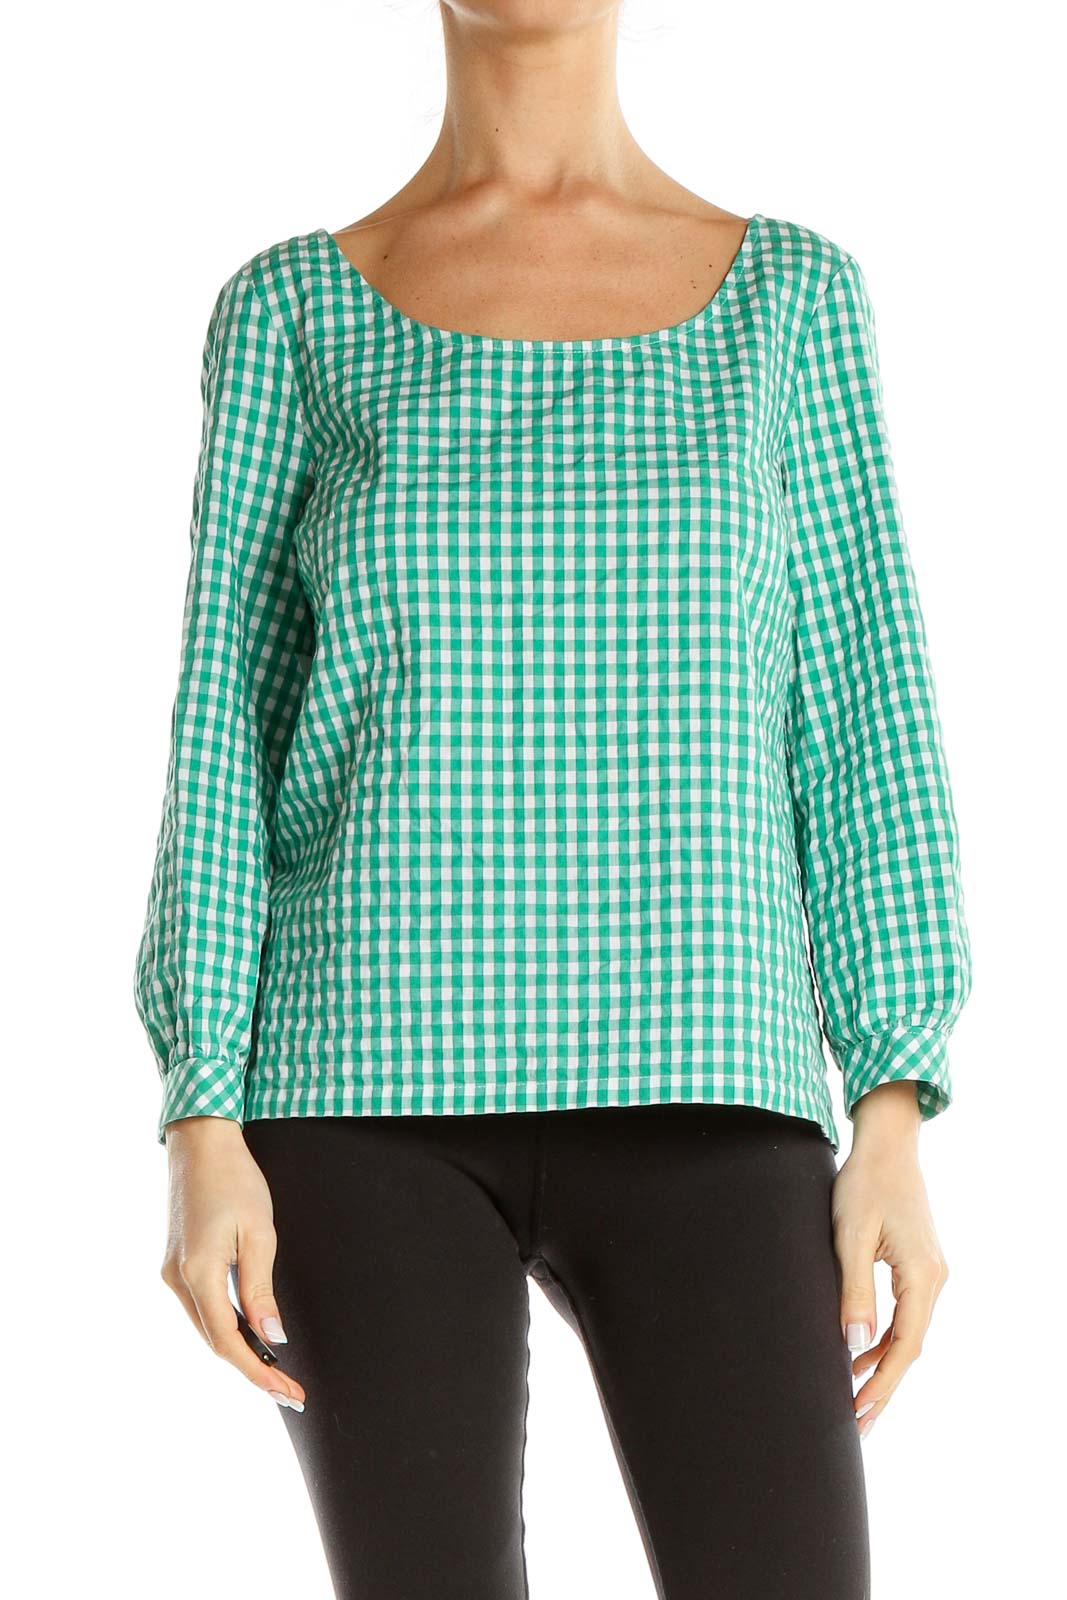 Green Gingham Classic Top Front